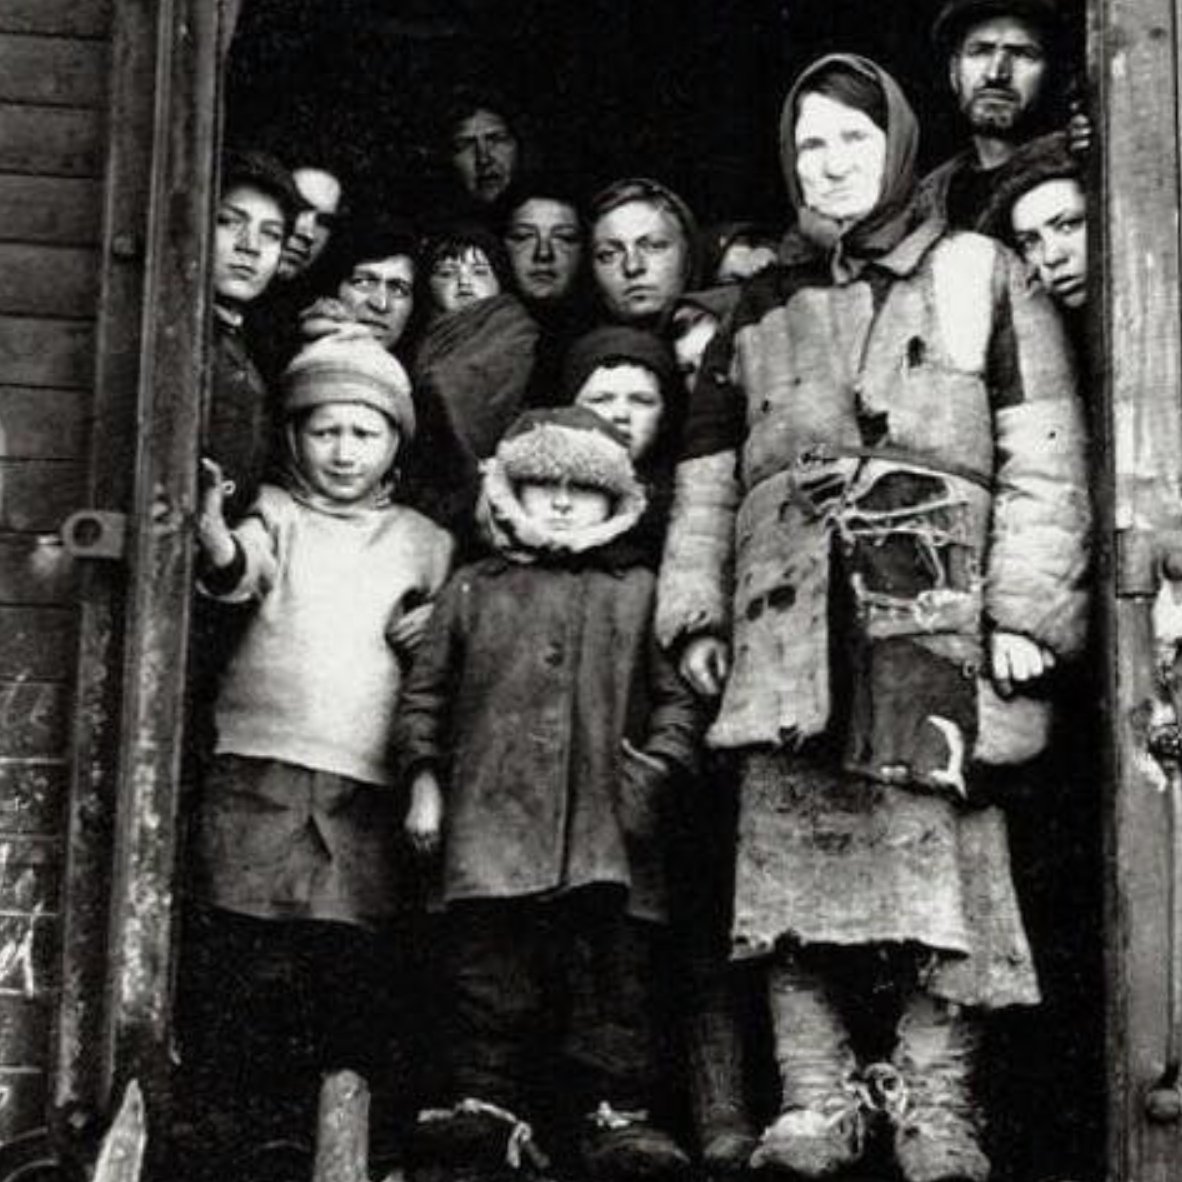 On the night of 9/10 February 1940, 140 000 Polish civilians were deported into Russia. The forced deportation to 'Nieludzka ziemia' (The Inhuman Land) just began. Up to 1.5 million Polish citizens, including over 200,000 Polish prisoners of war, were deported by the NKVD from